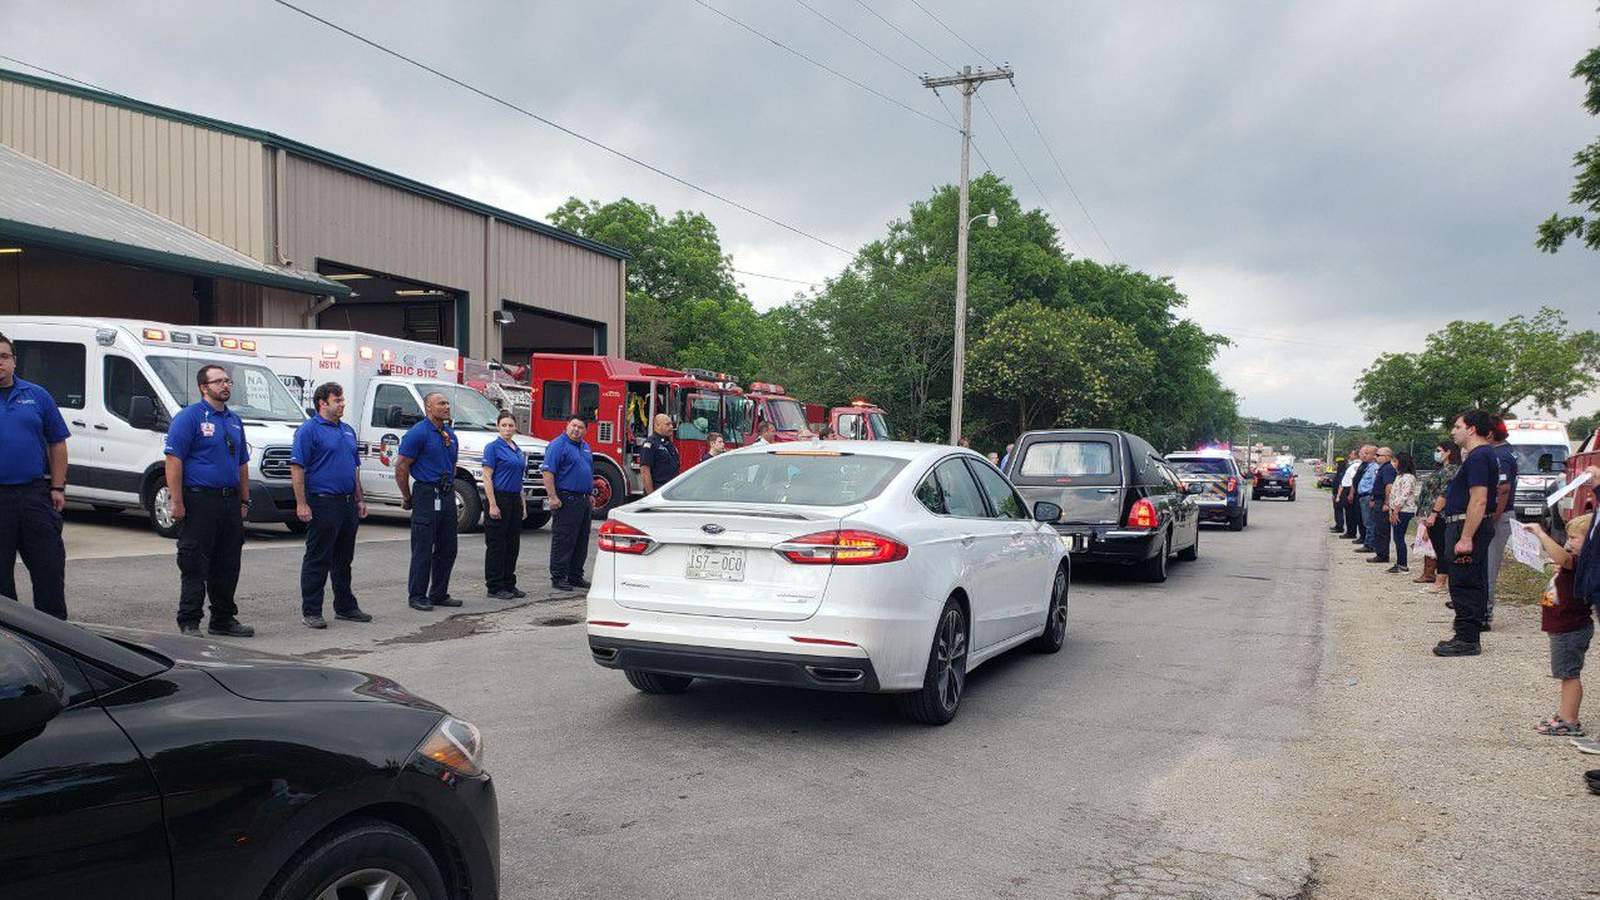 First responders take part in procession for fallen Medina County paramedic